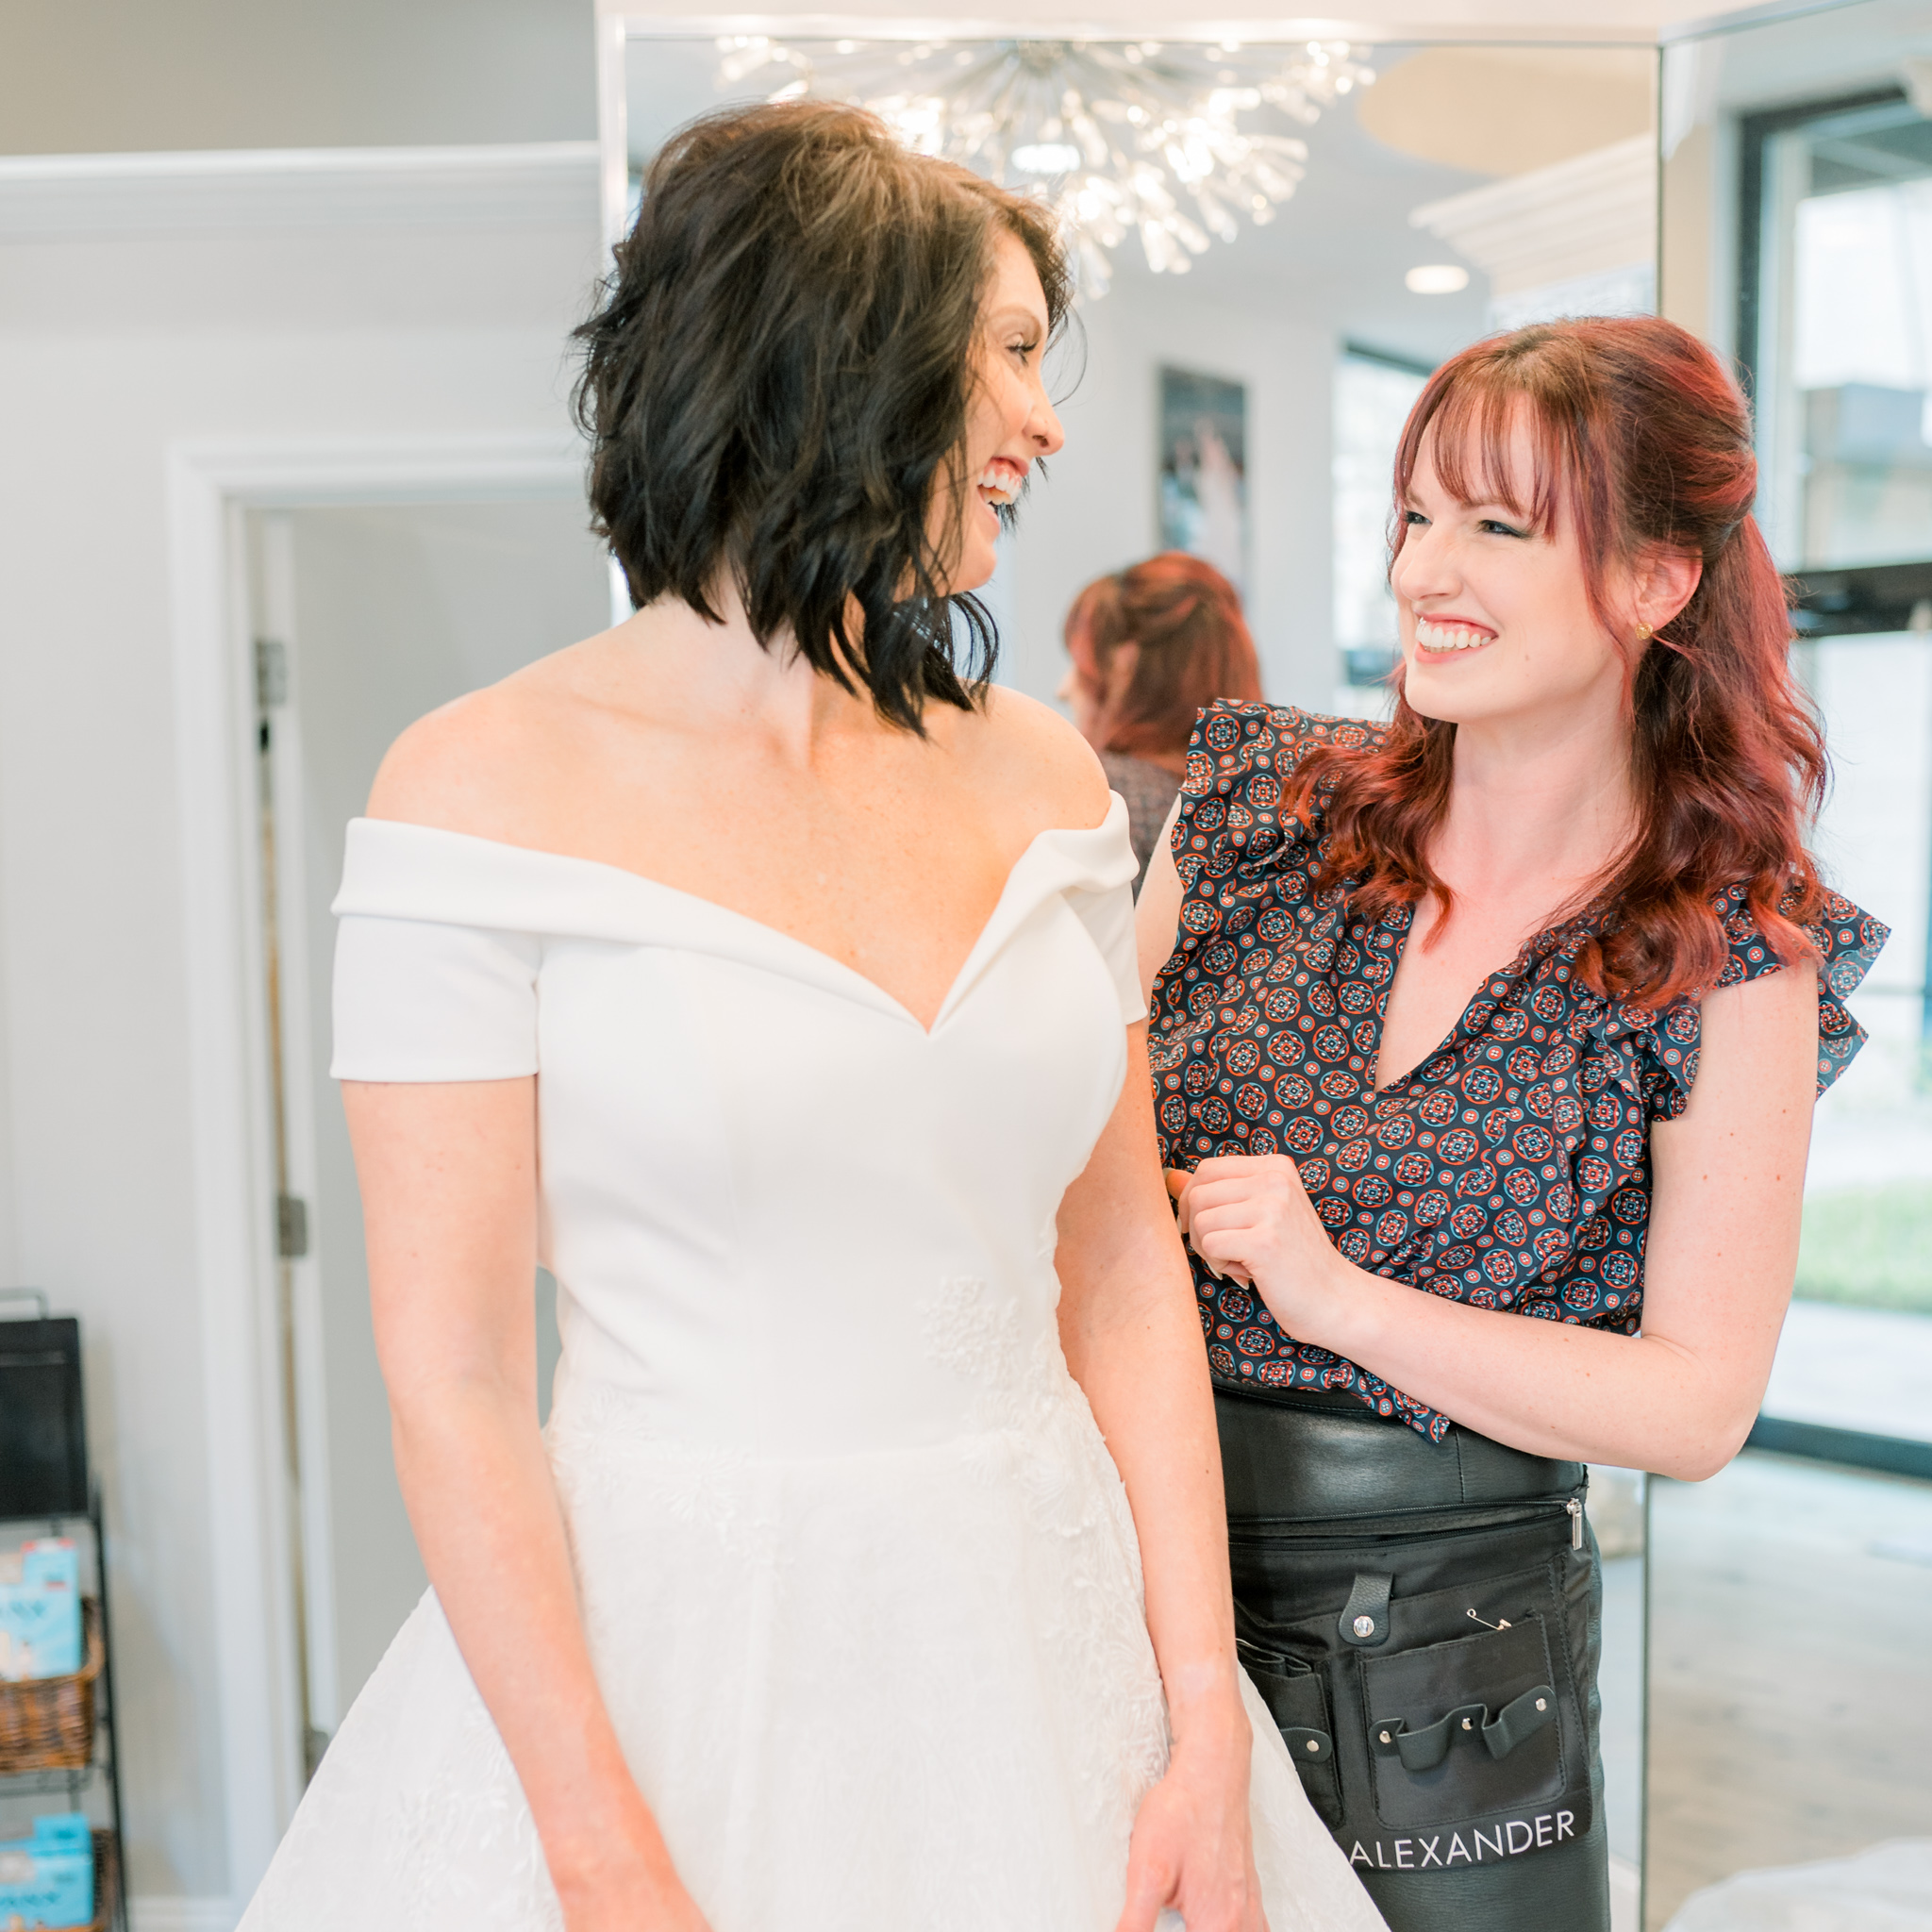 The 4 Most Important Things to Think About Before Your Bridal Appointment Image